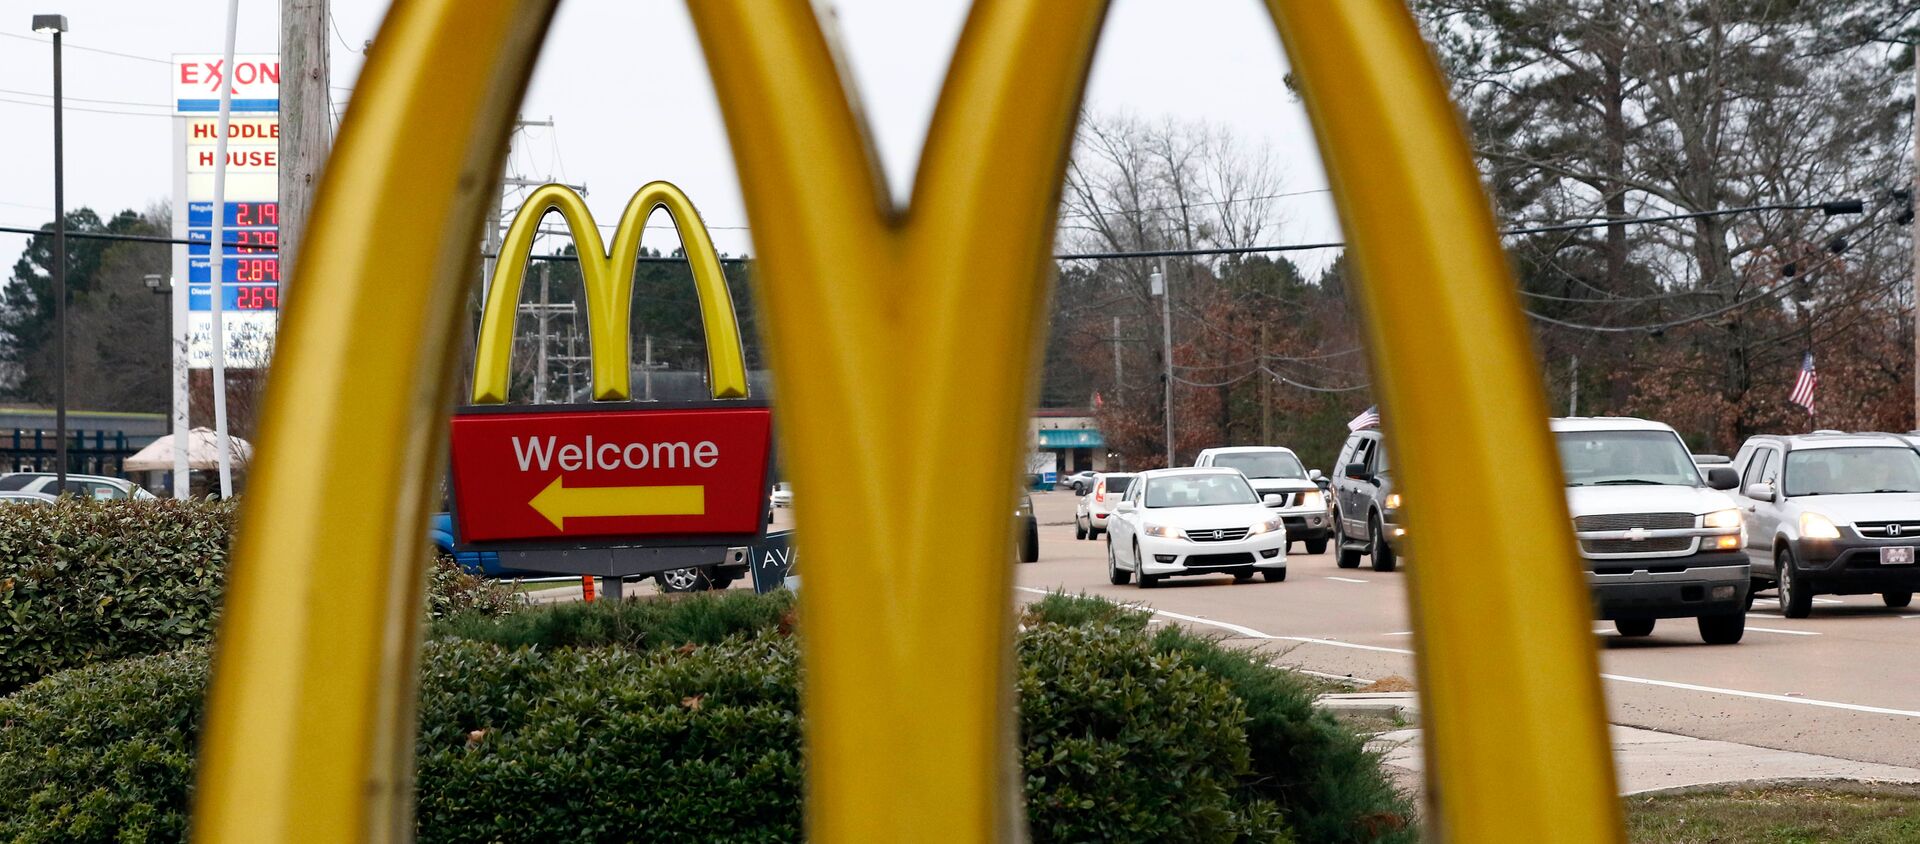 This Feb. 15, 2018, file photo shows a McDonald's Restaurant in Brandon, Miss. McDonald's Corp. reports earnings Monday, April 30. - 俄罗斯卫星通讯社, 1920, 08.05.2021